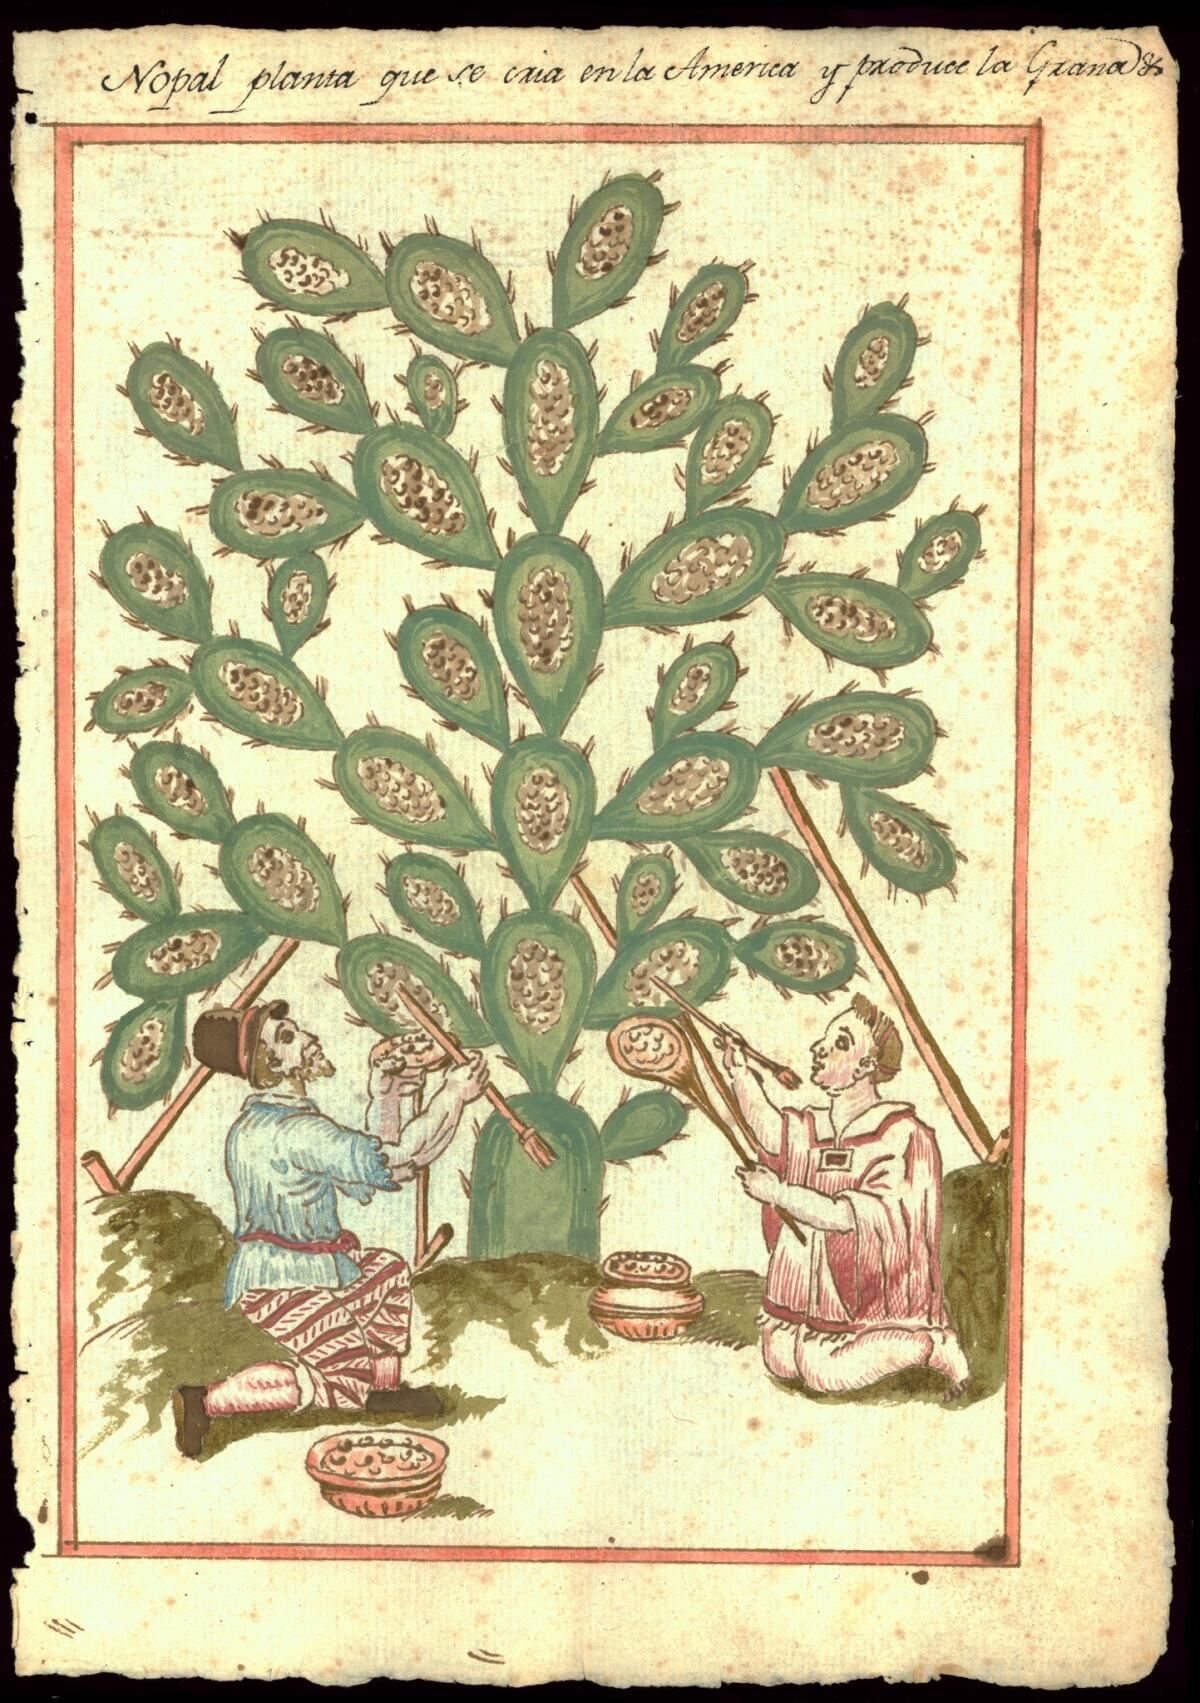 A 17th century depiction of a nopal from a book — part of "Visual Voyages," on view at the Huntington. (Newberry Library, Chicago)